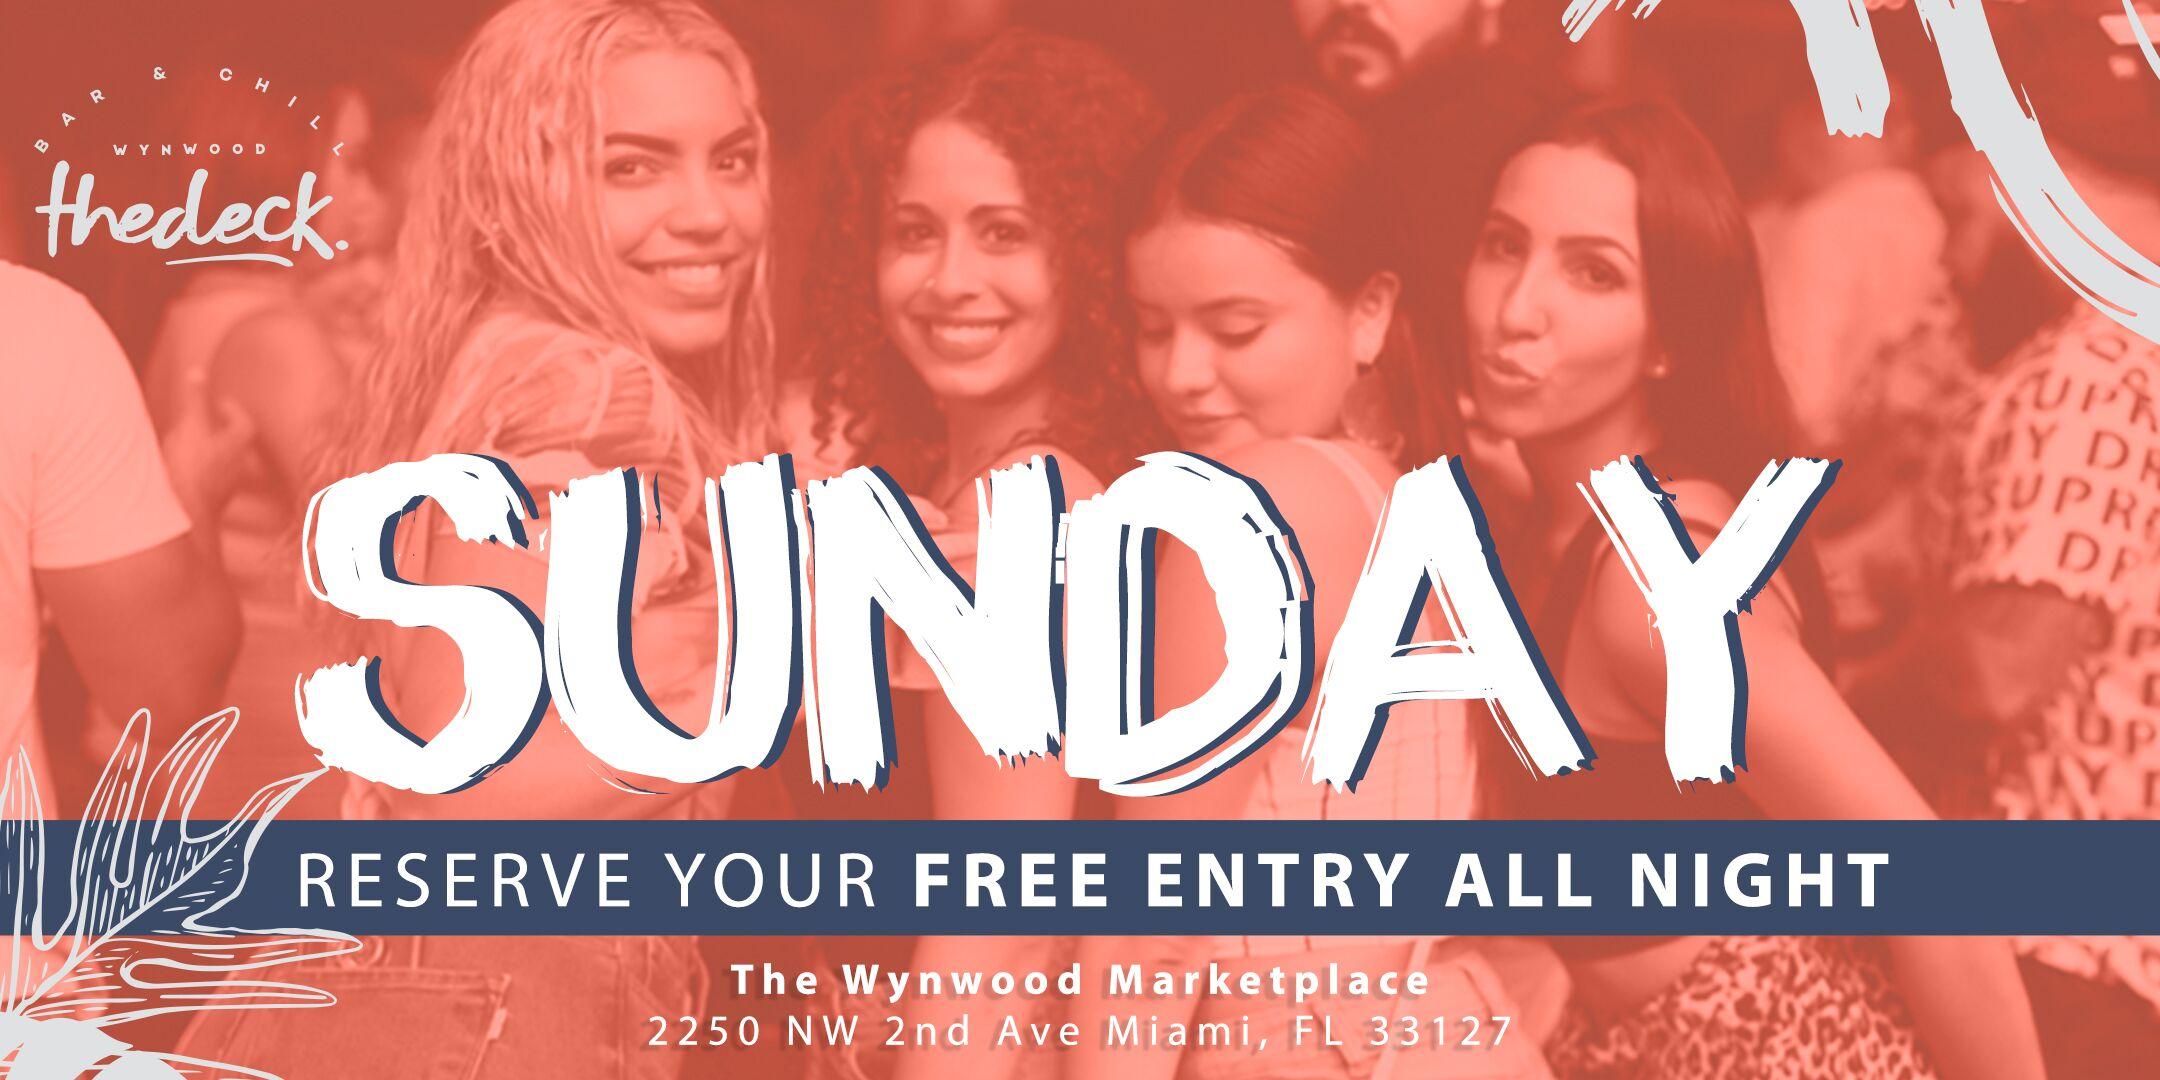 Sundays at thedeck in The Wynwood Marketplace